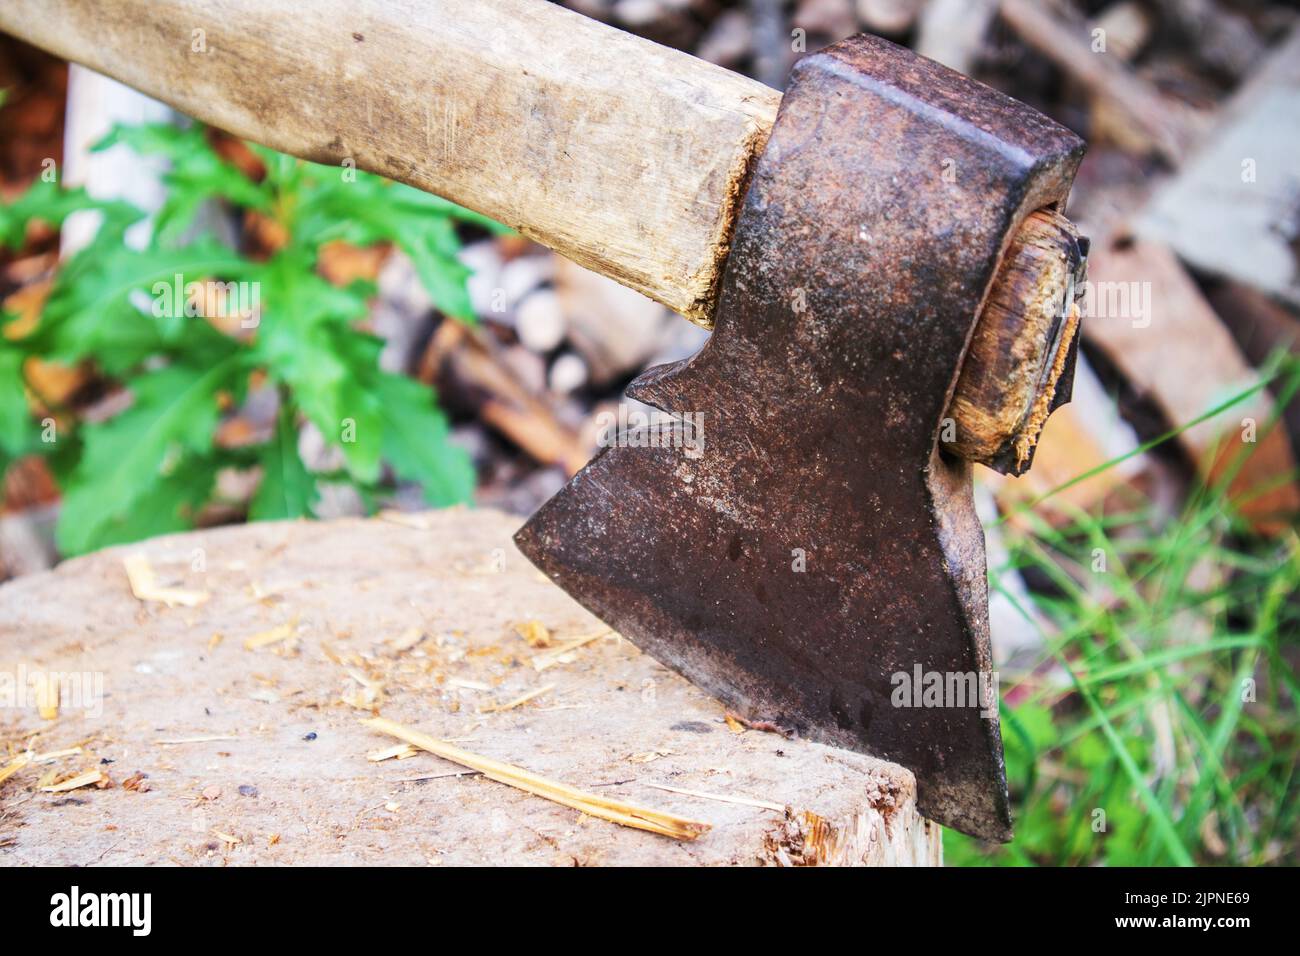 An axe stuck in a old wooden beam in the dark green grass Stock Photo